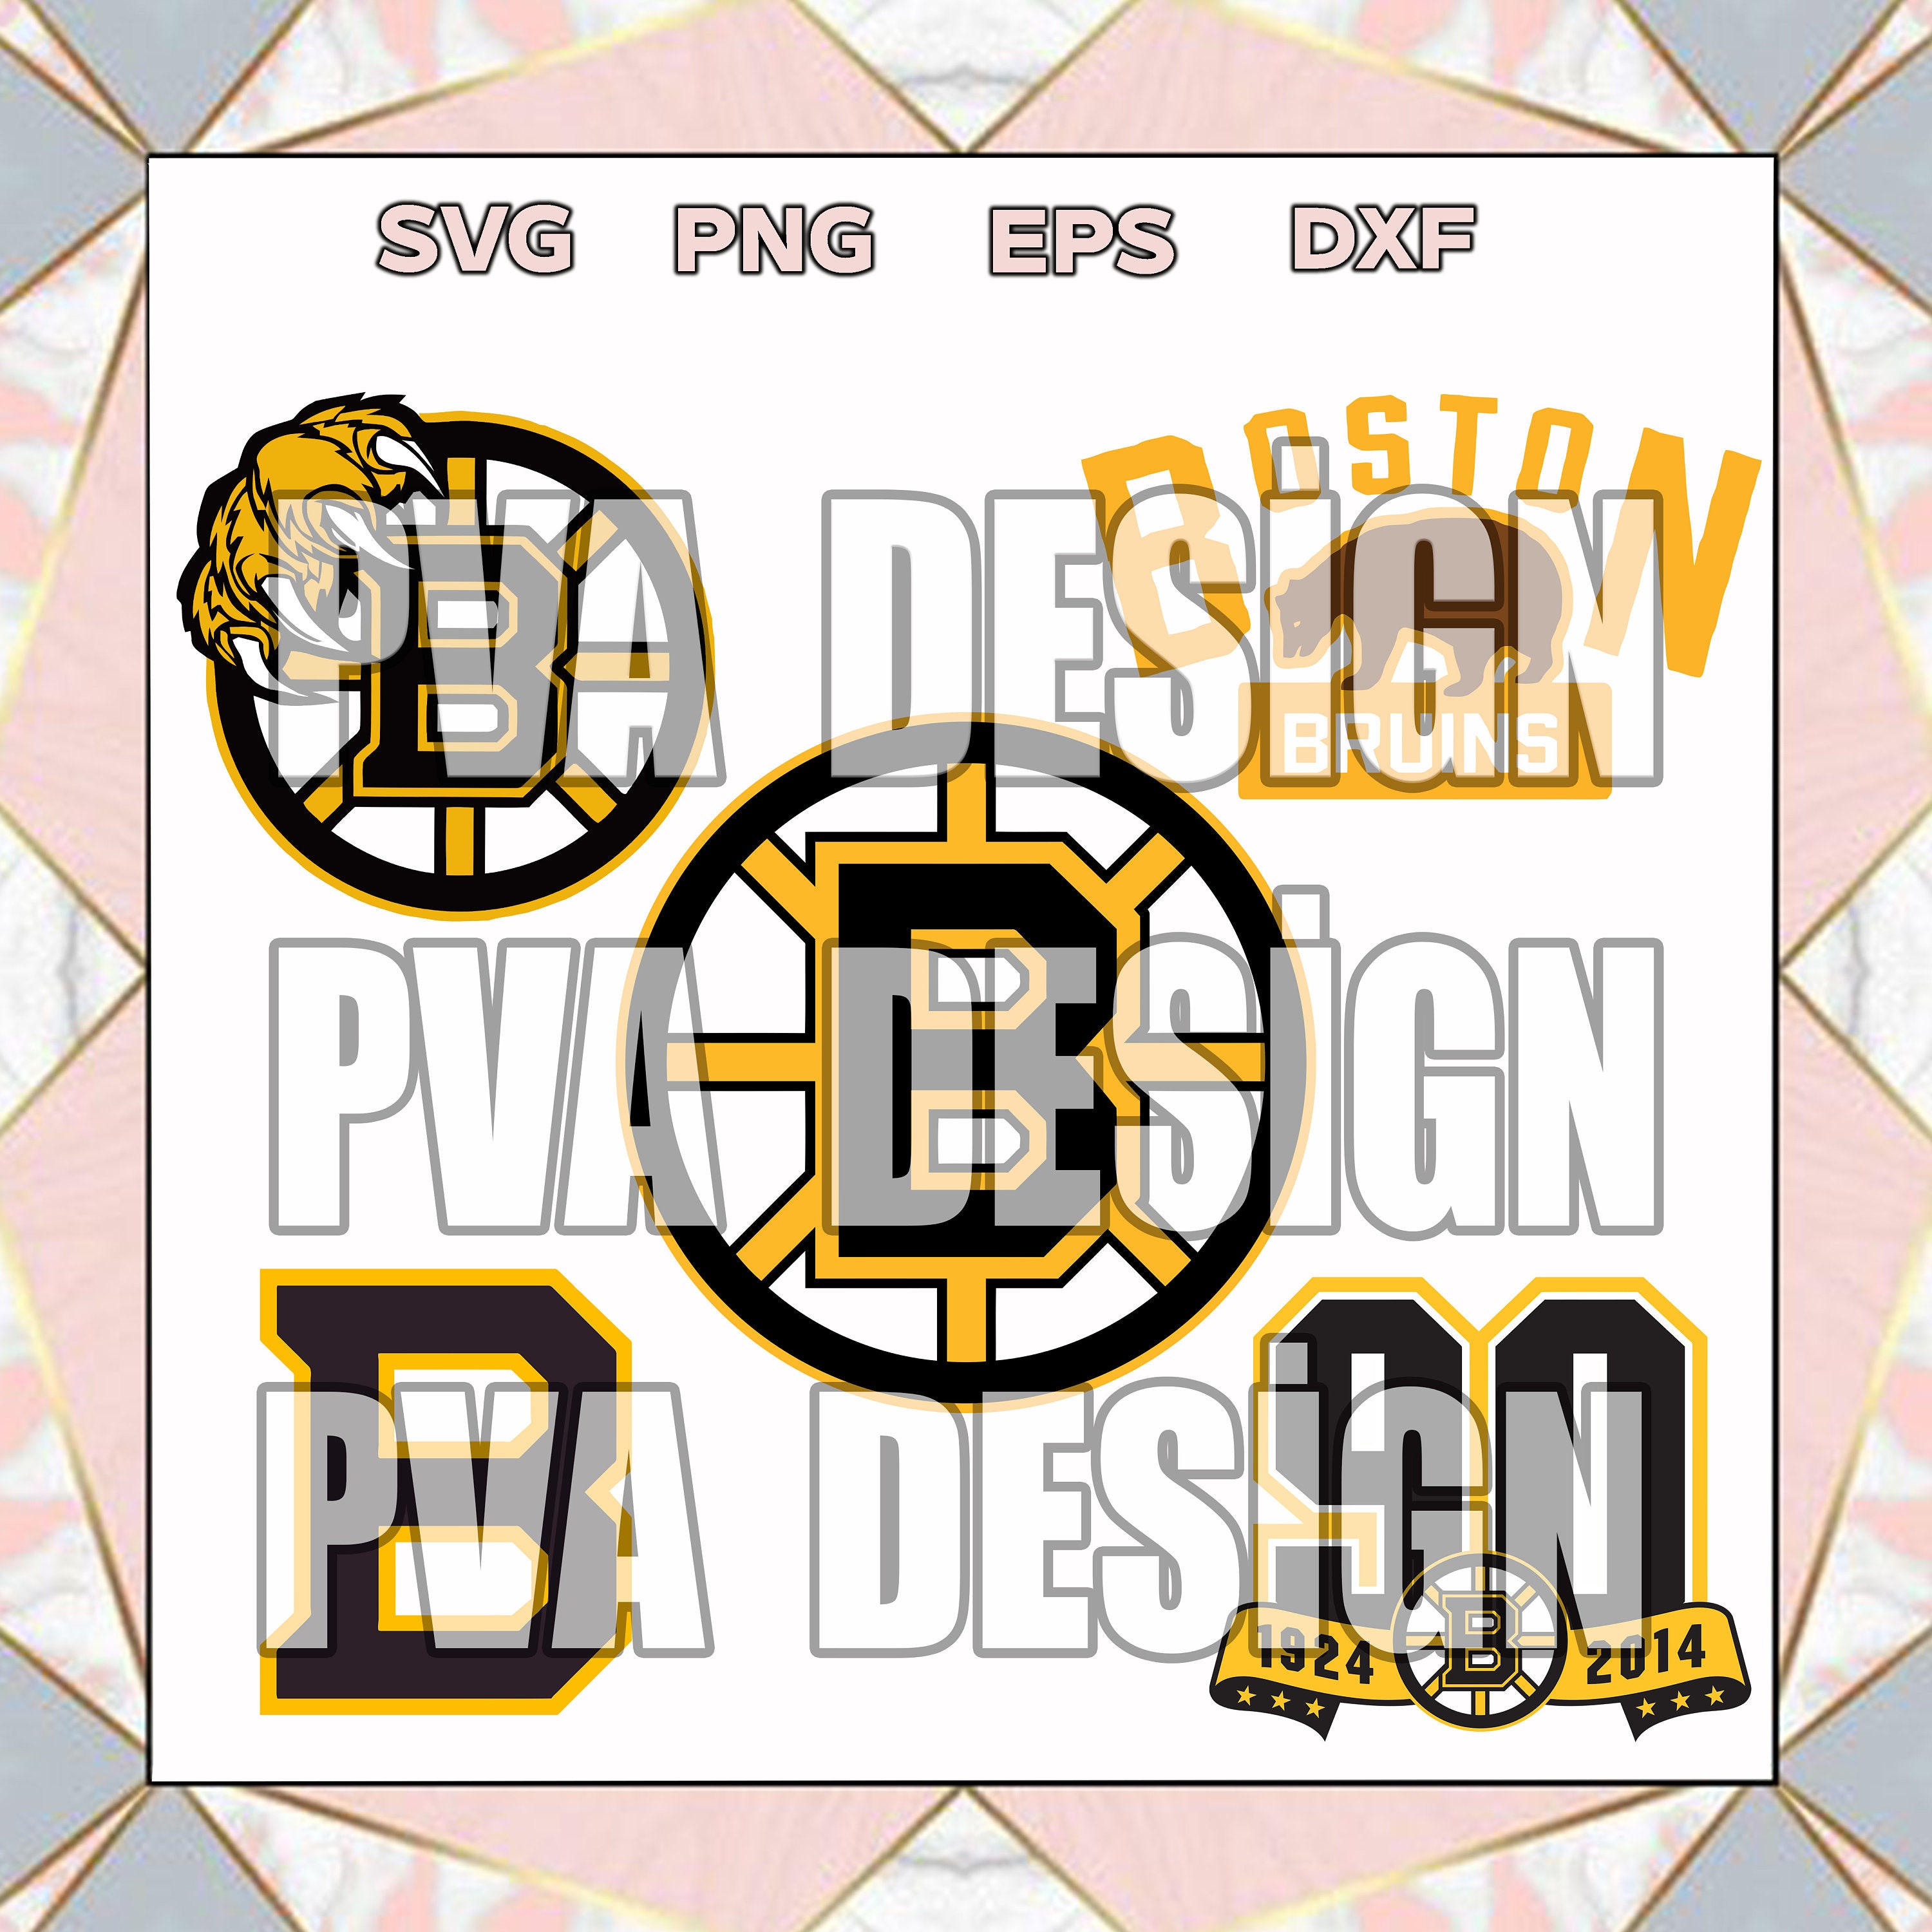 NHL Logo Boston Bruins, Boston Bruins SVG Vector, Boston Bruins Clipart, Boston  Bruins Ice Hockey Kit SVG, DXF, PNG, EPS Instant Download NHL-Files For  Silhouette, Files For Clipping. - Gravectory